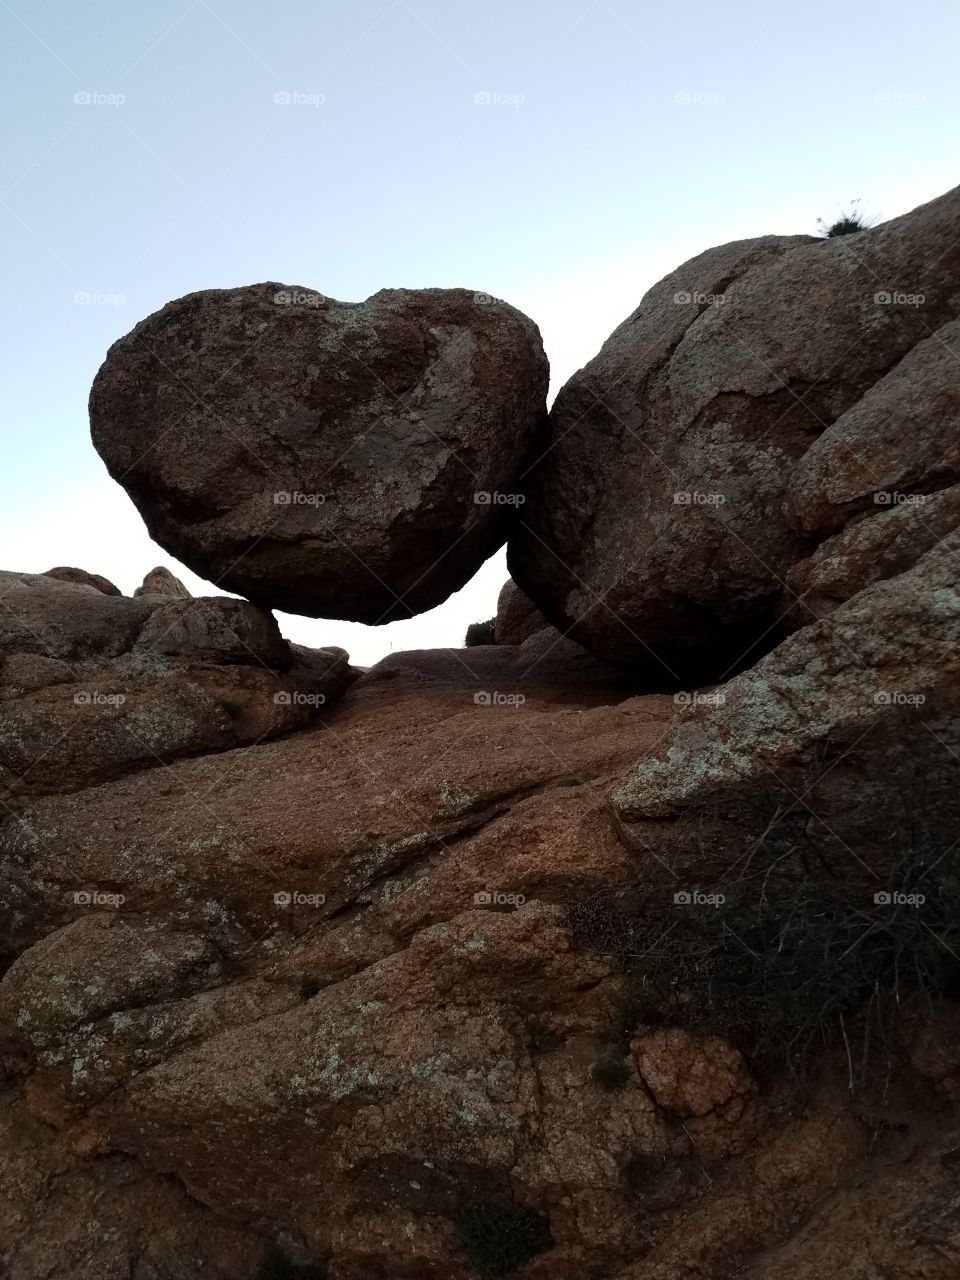 Stuck between a rock and a hard place